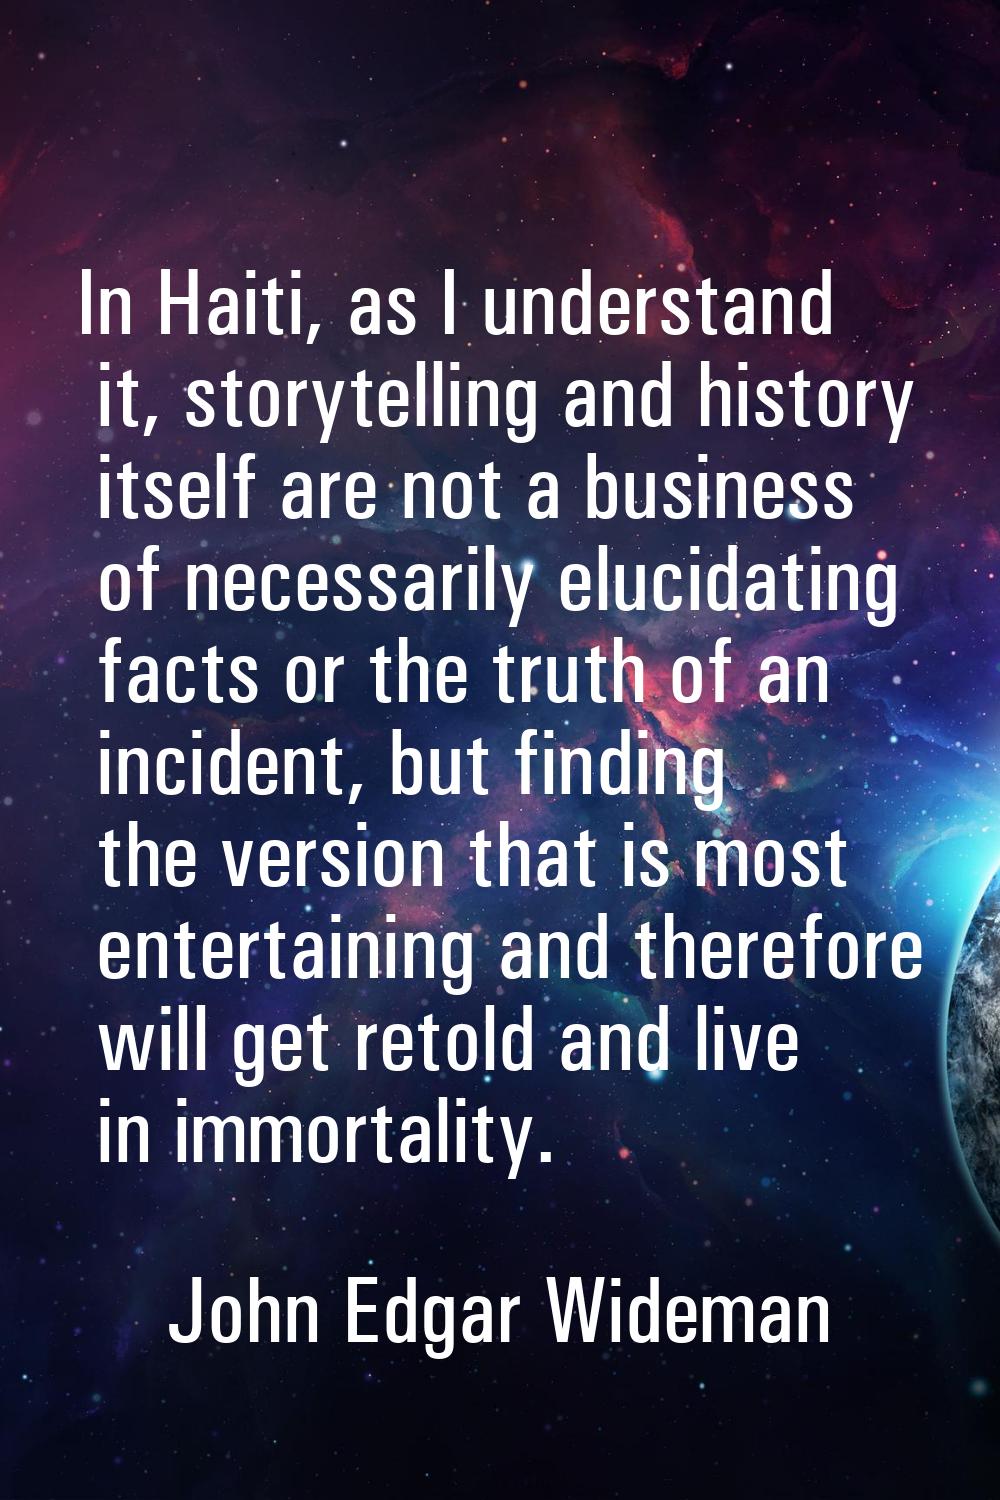 In Haiti, as I understand it, storytelling and history itself are not a business of necessarily elu